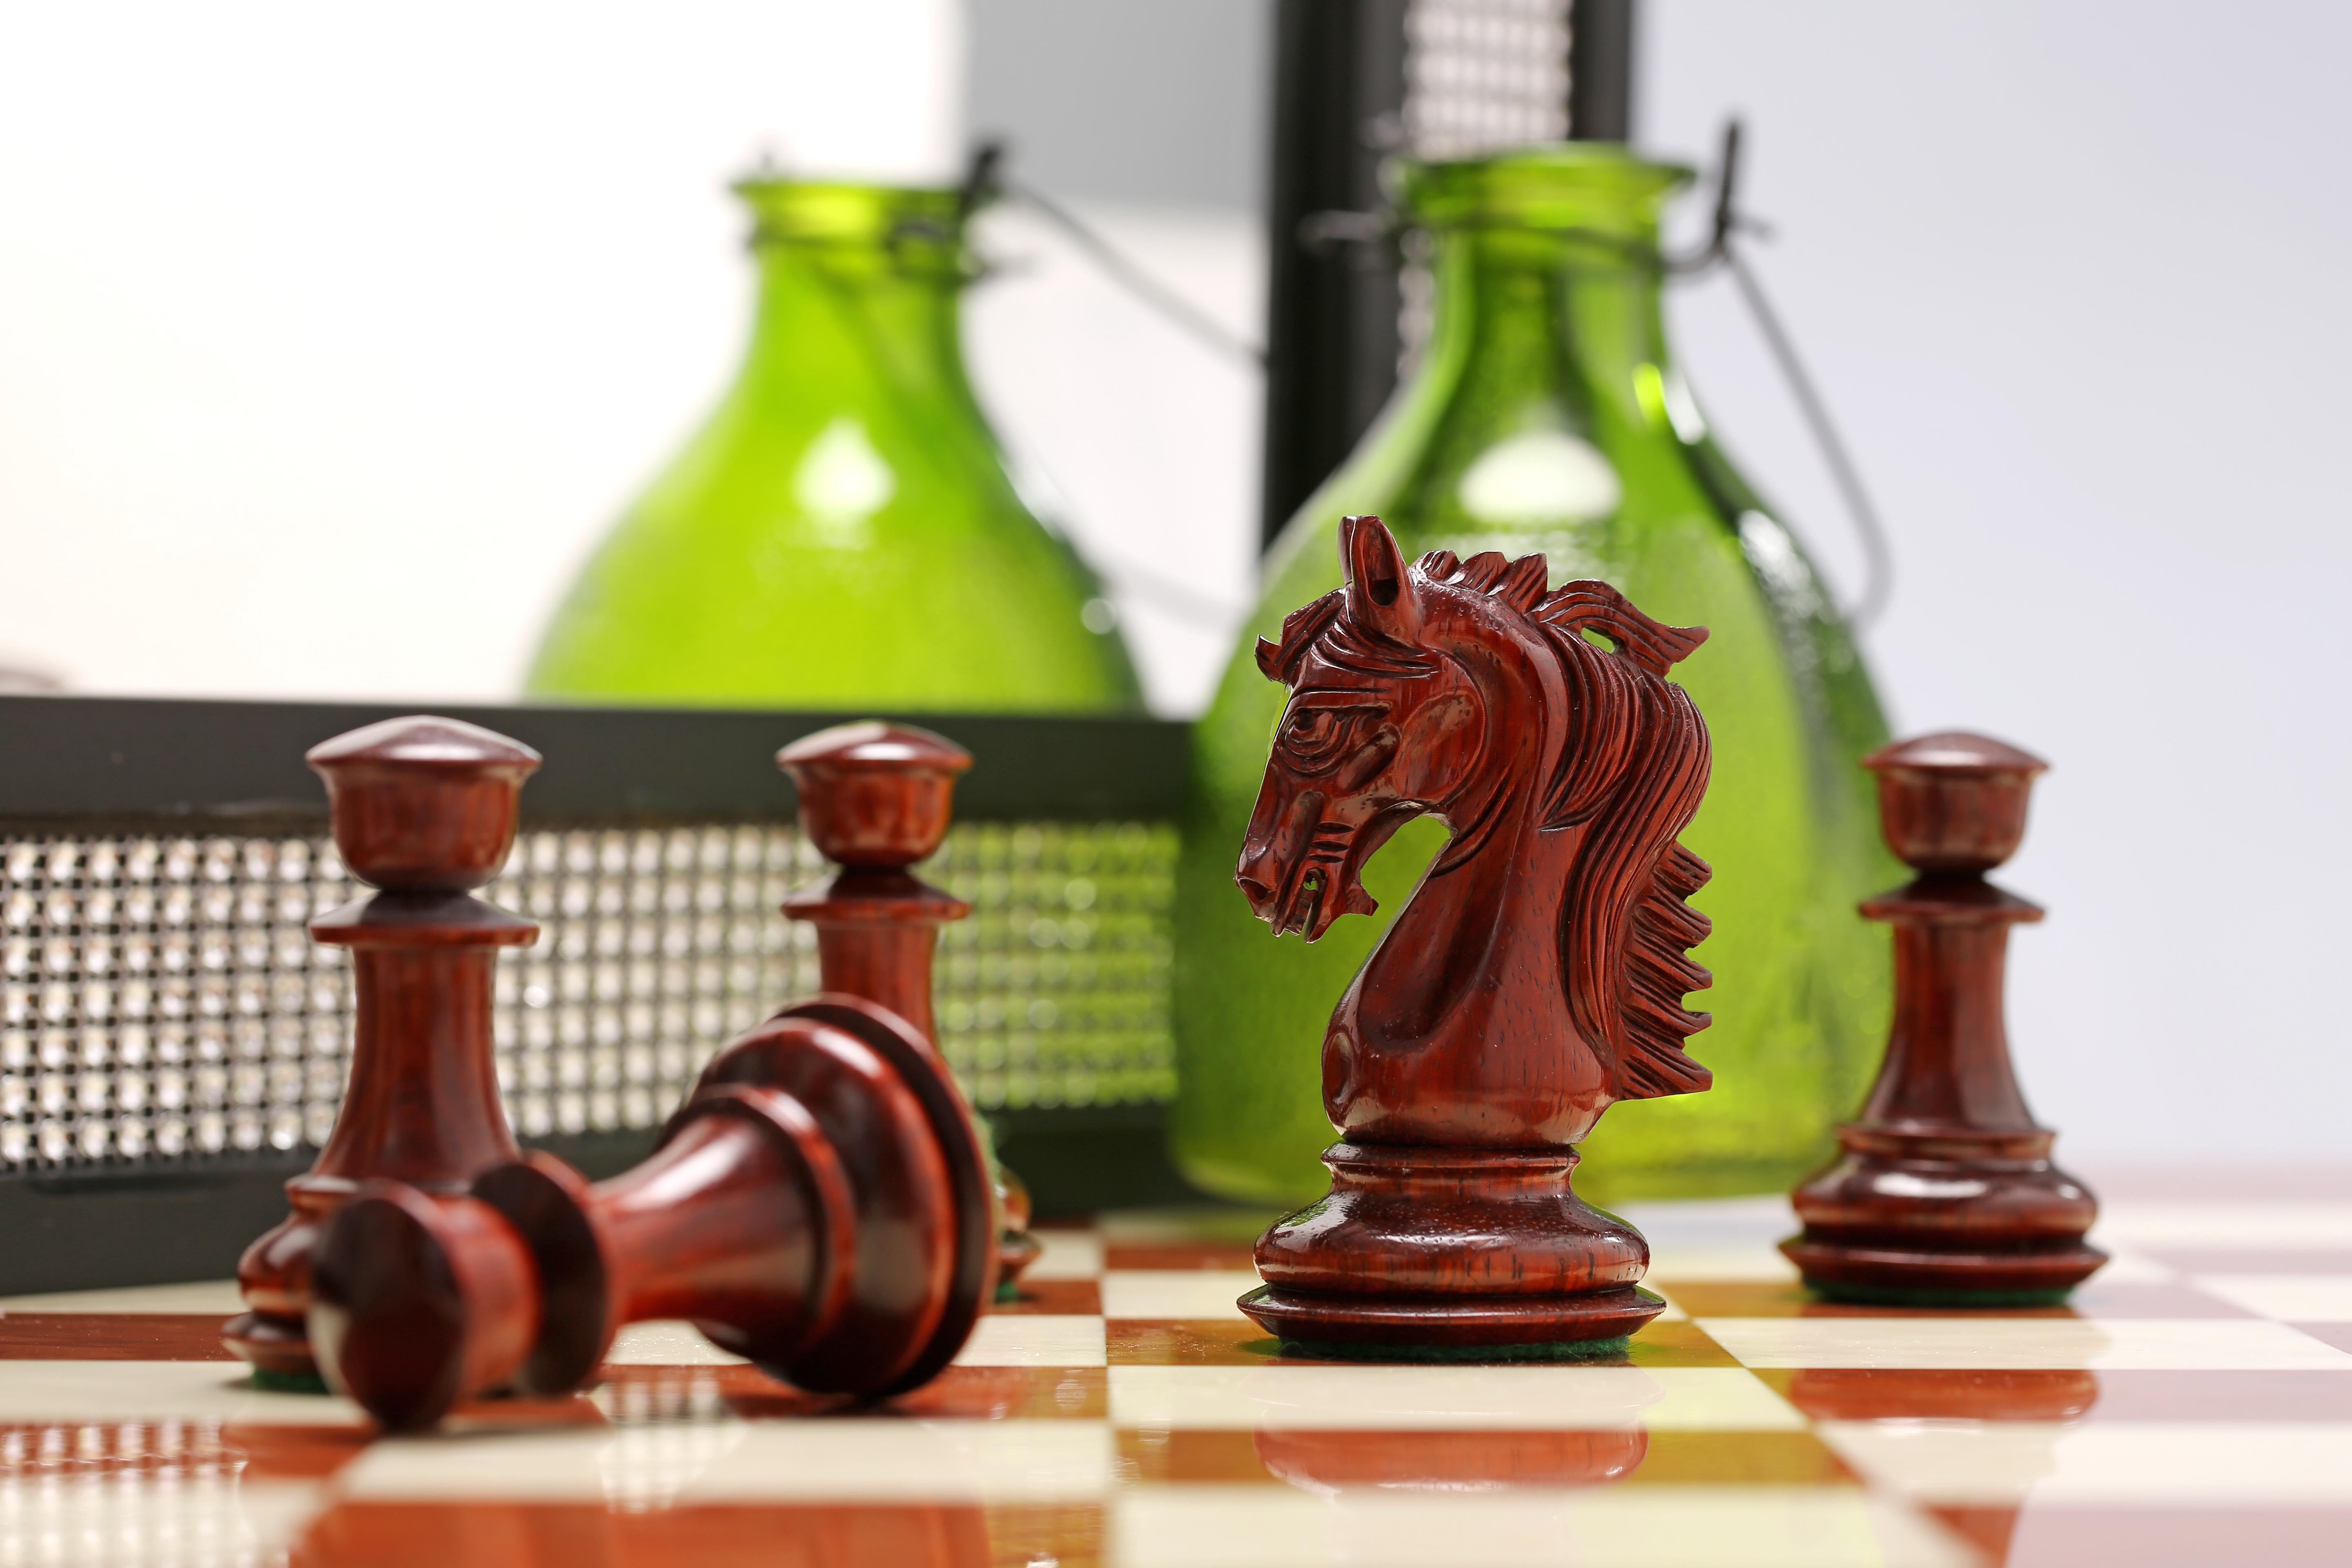 chess pieces on a chessboard